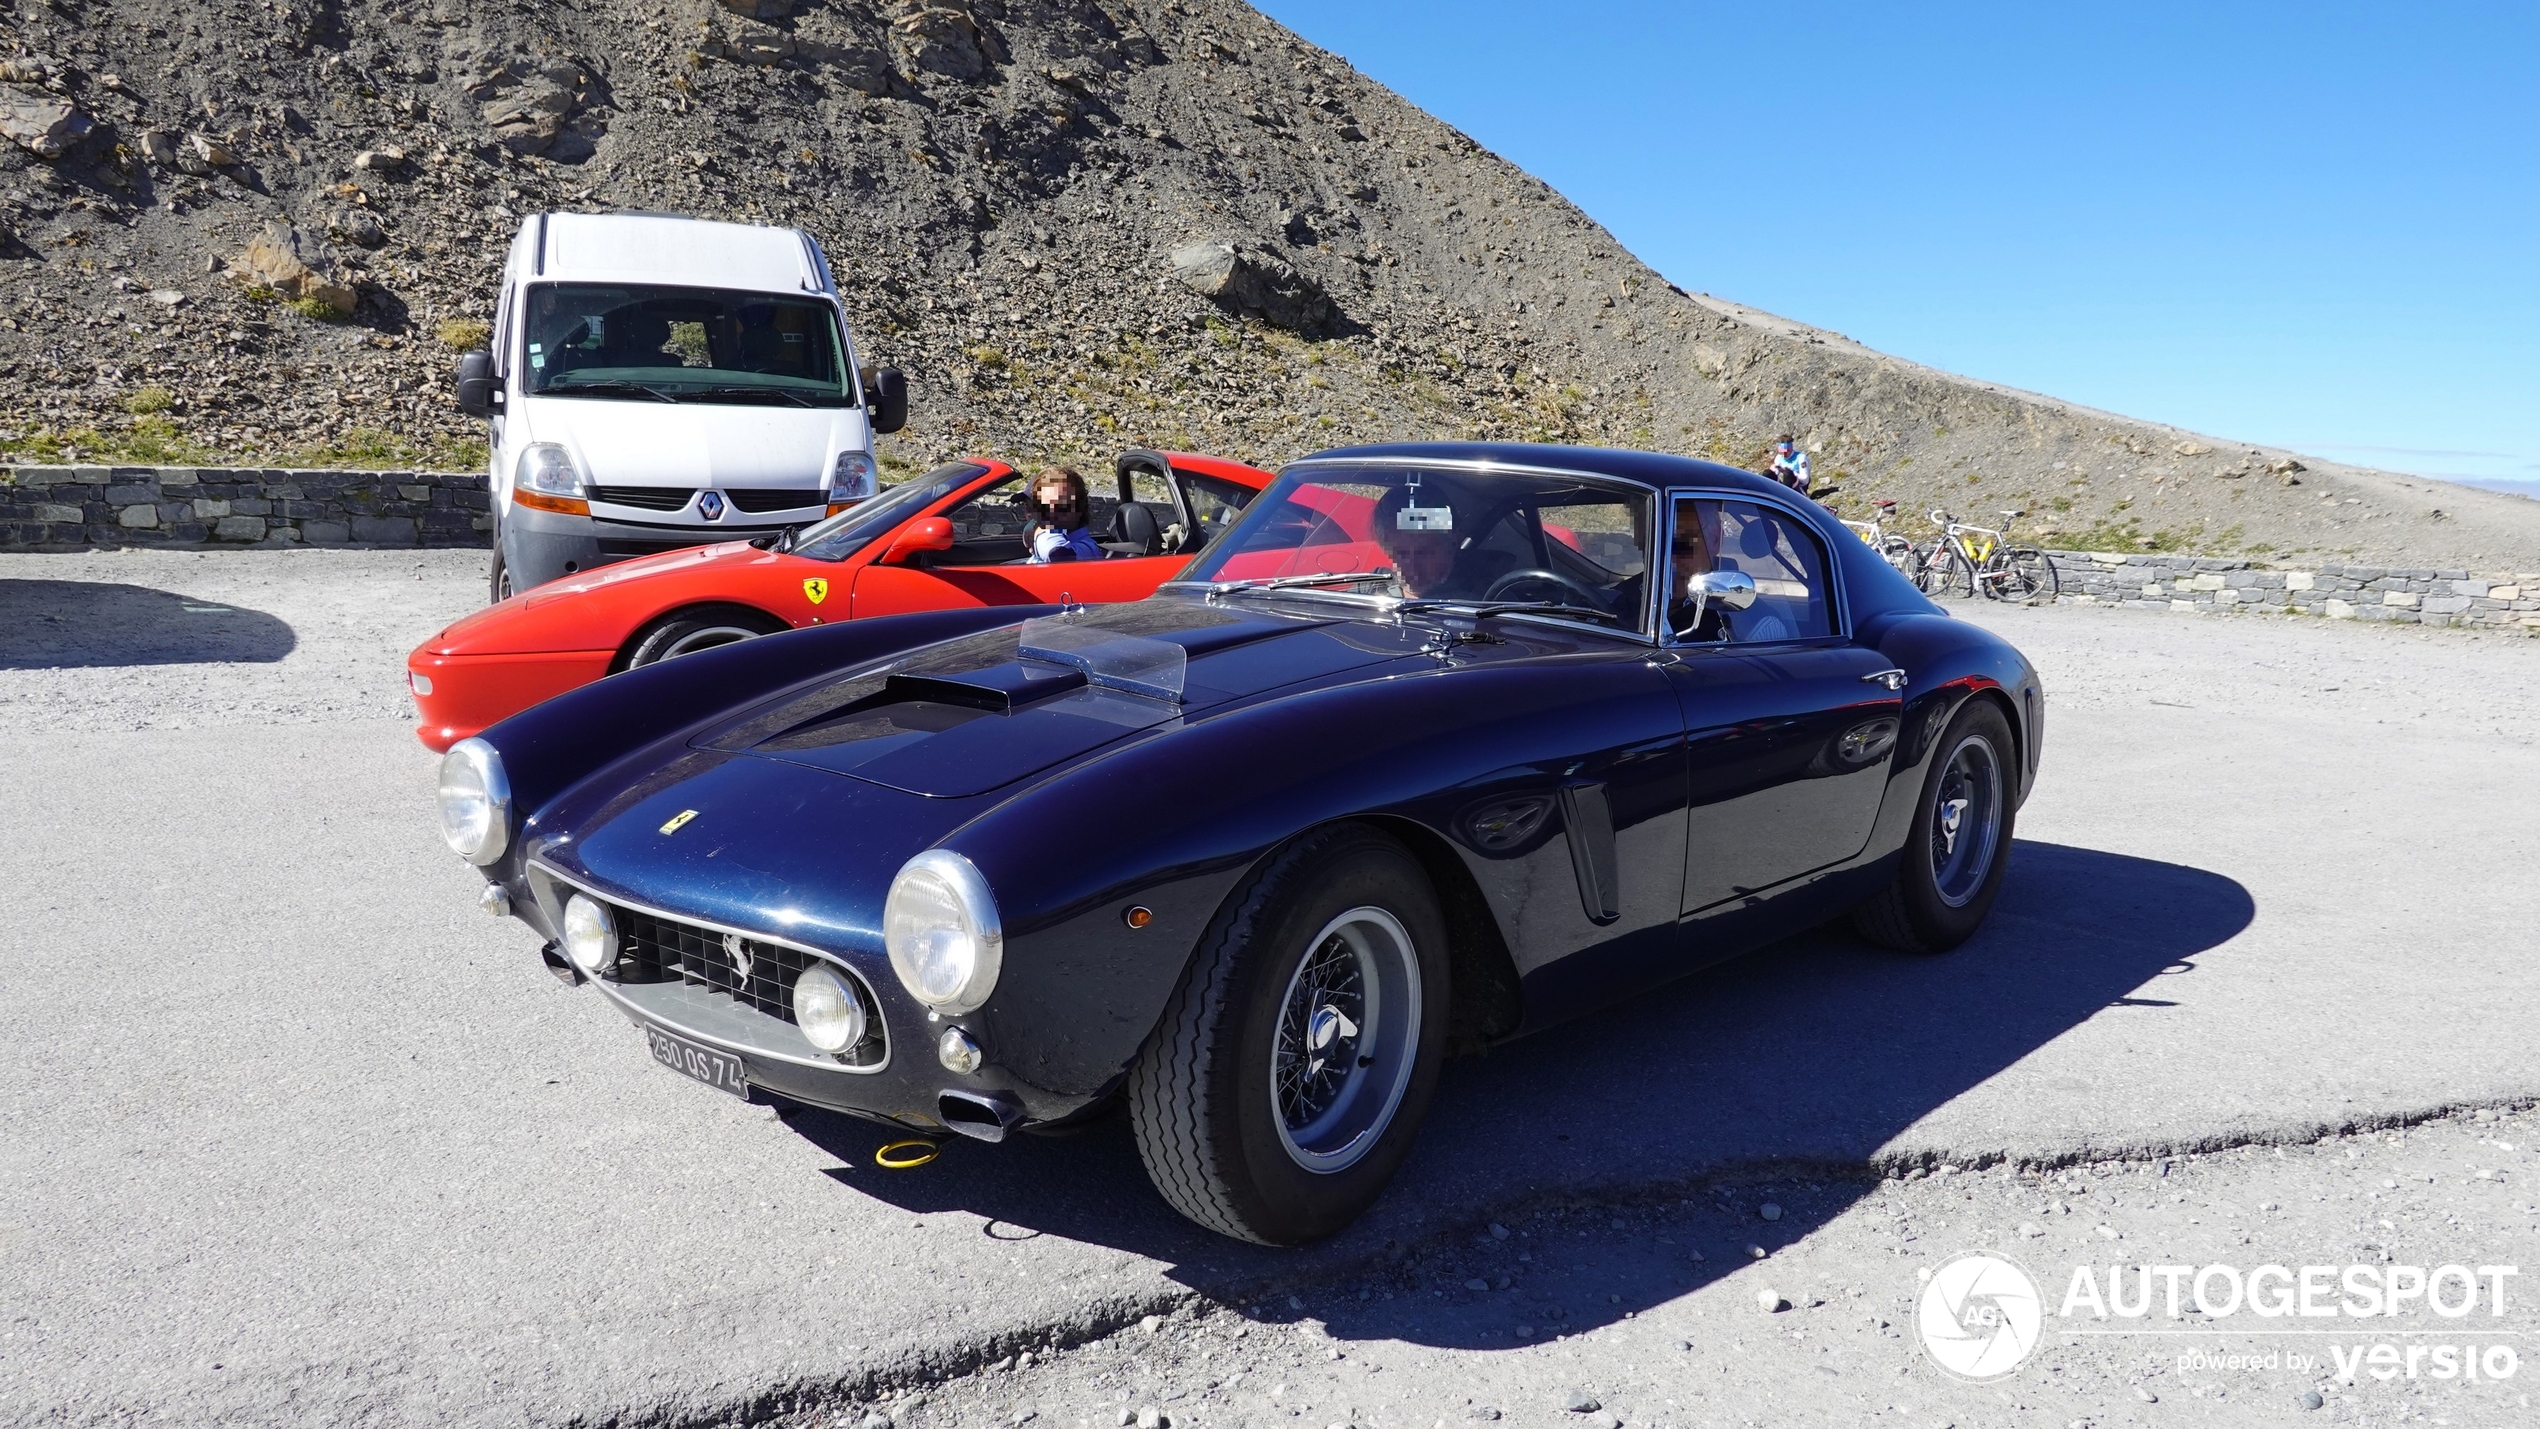 Here you can see the even rarer version of the 250 GT SWB Berlinetta.